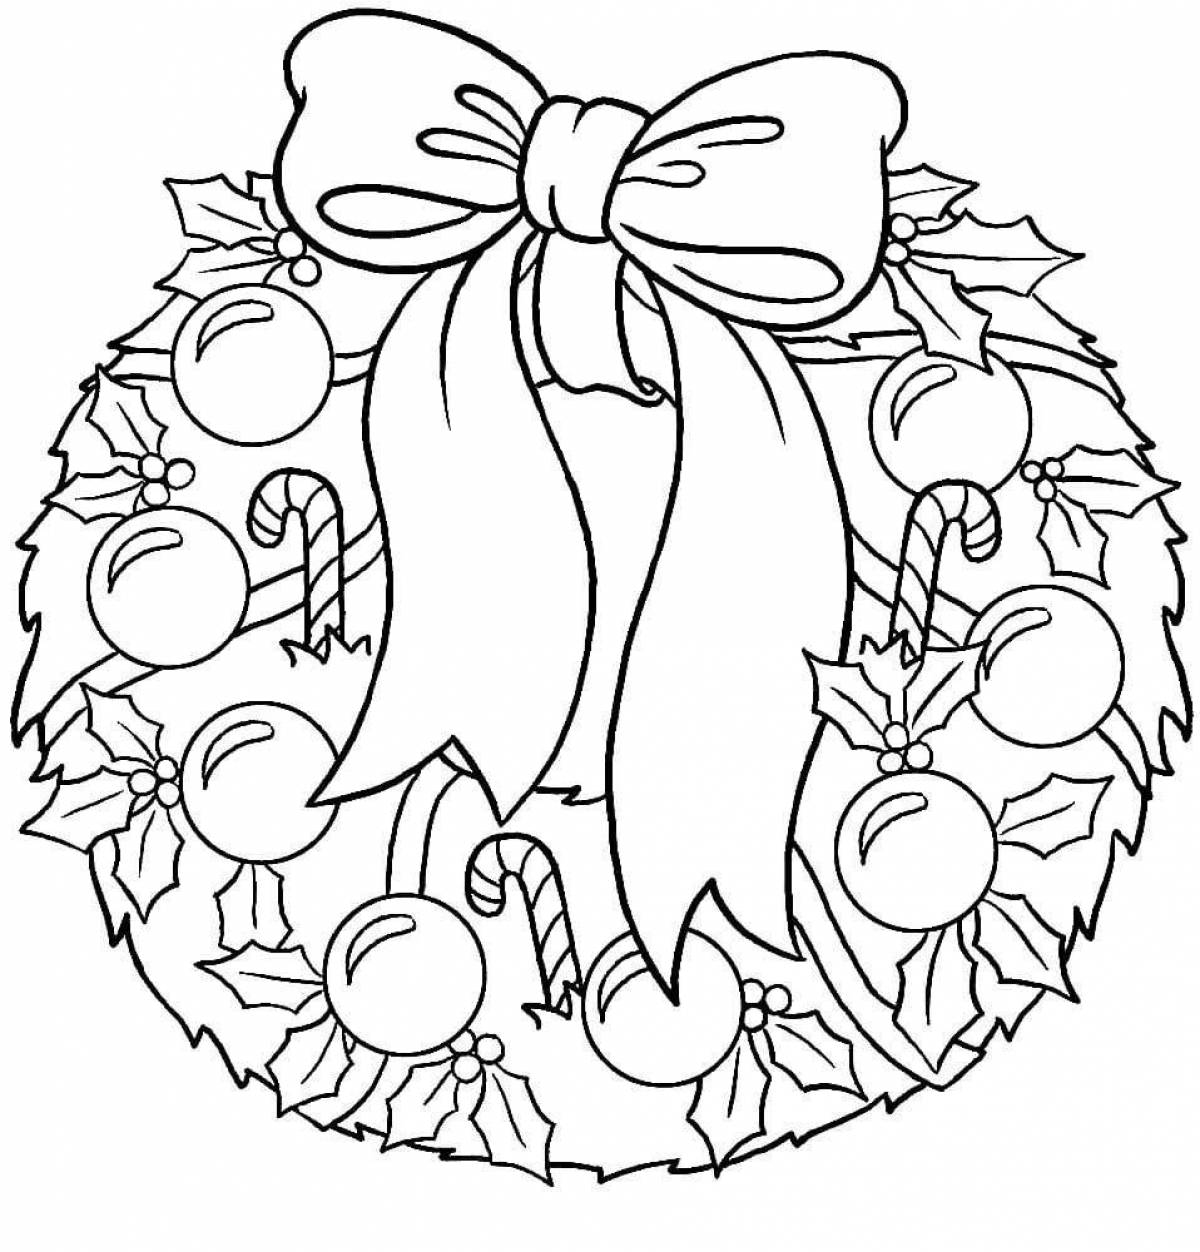 Detailed Christmas wreath coloring page